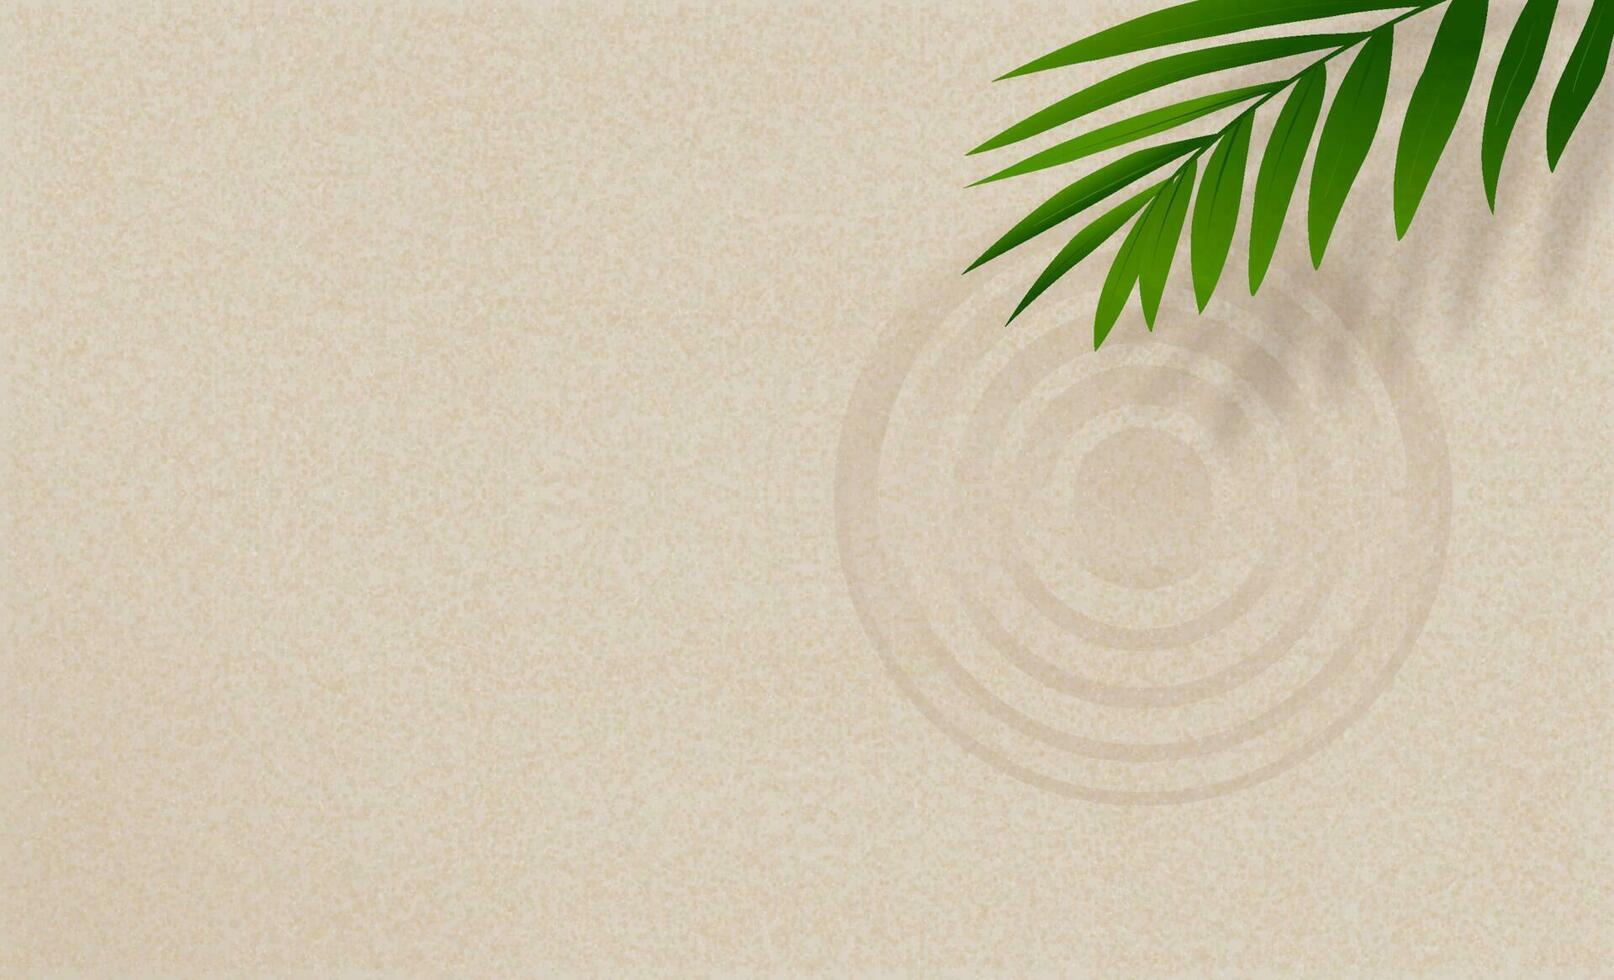 Zen sand pattern with palm leaves,Zen Garden with circles lines raked on smooth sandy surface background,Harmony,Meditation,Zen like concept, Sand beach texture with simple spiritual in Summer beach vector